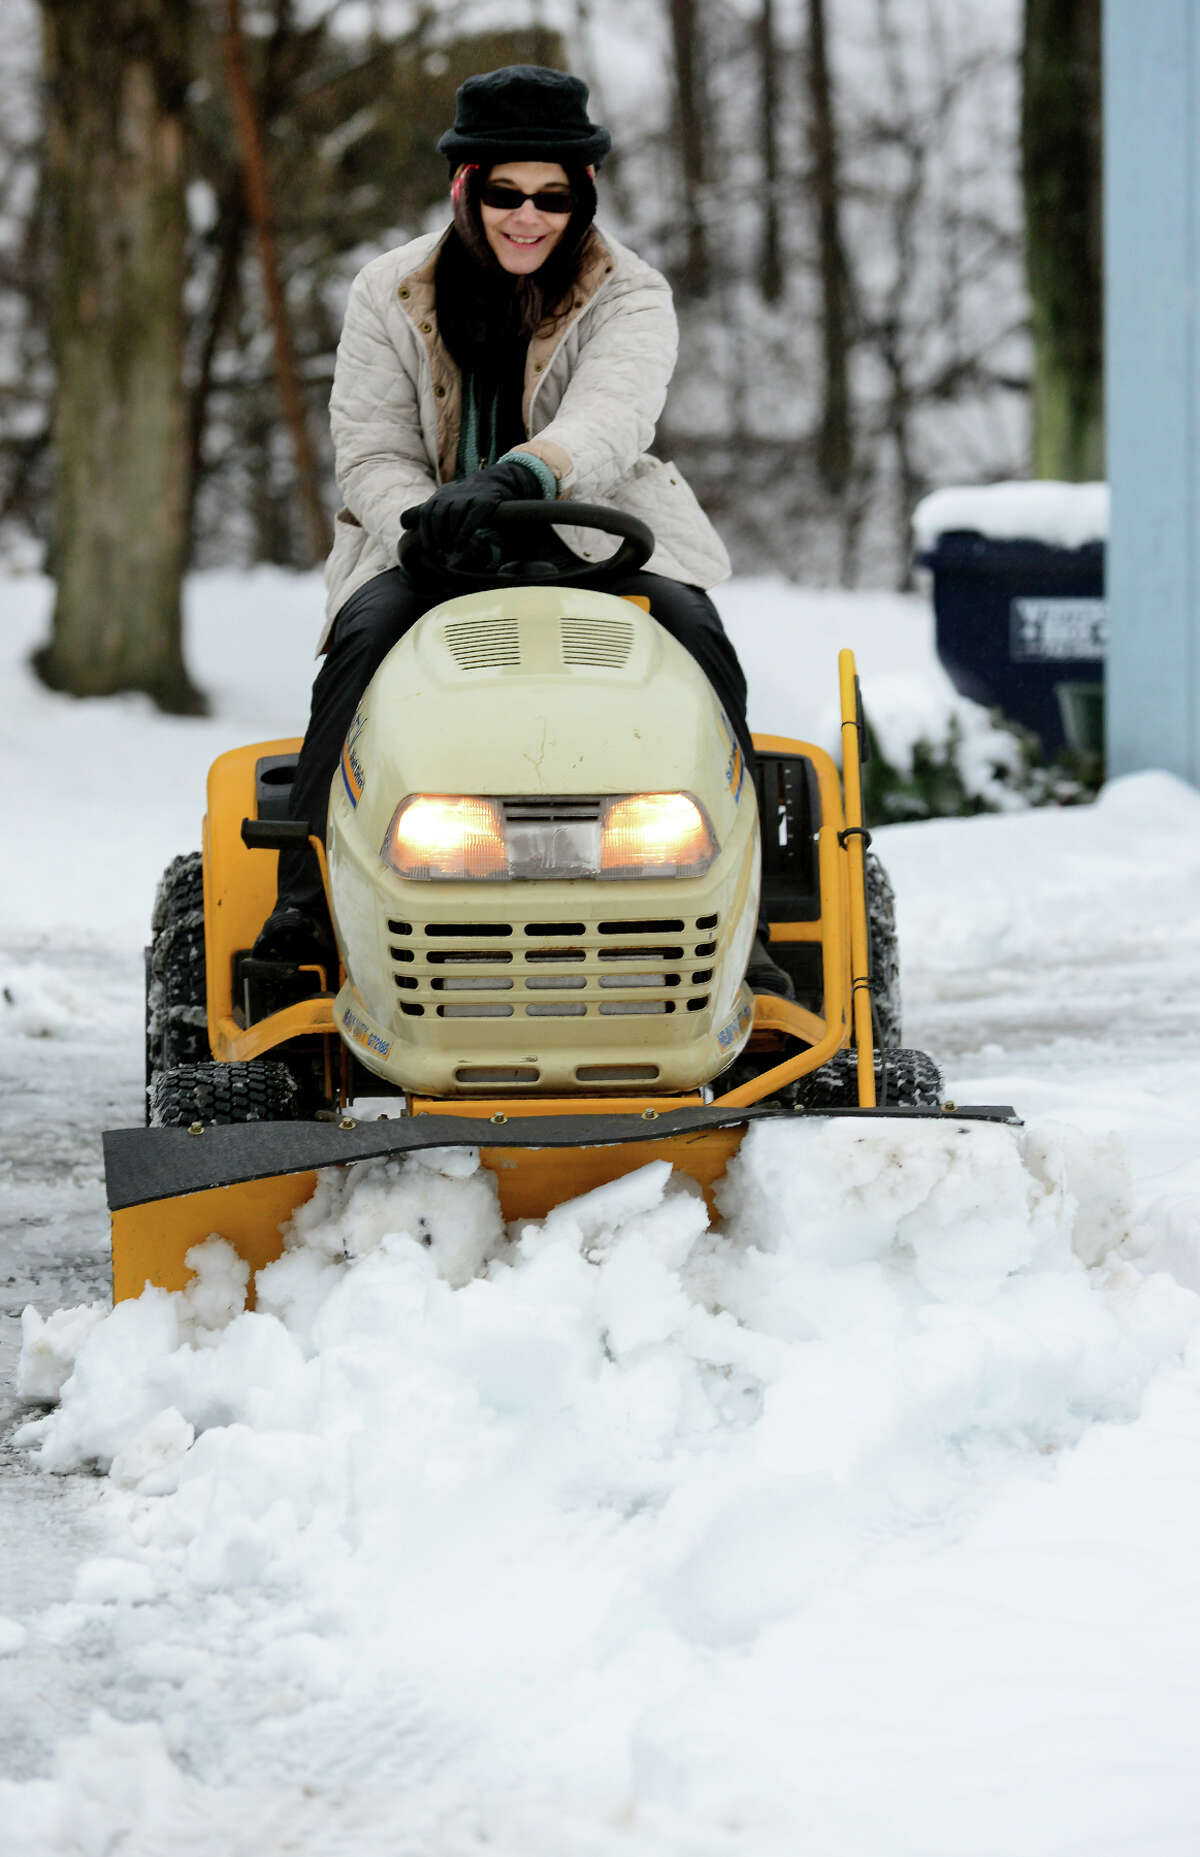 Donna Cherhoniak plows snow with her Cub Cadet plow at her home along Derby Avenue in Seymour, Conn. on Saturday Jan. 24, 2015. Cherhoniak said she got the plow on Craigslist with every attachment available and this was the first time she got to use it.